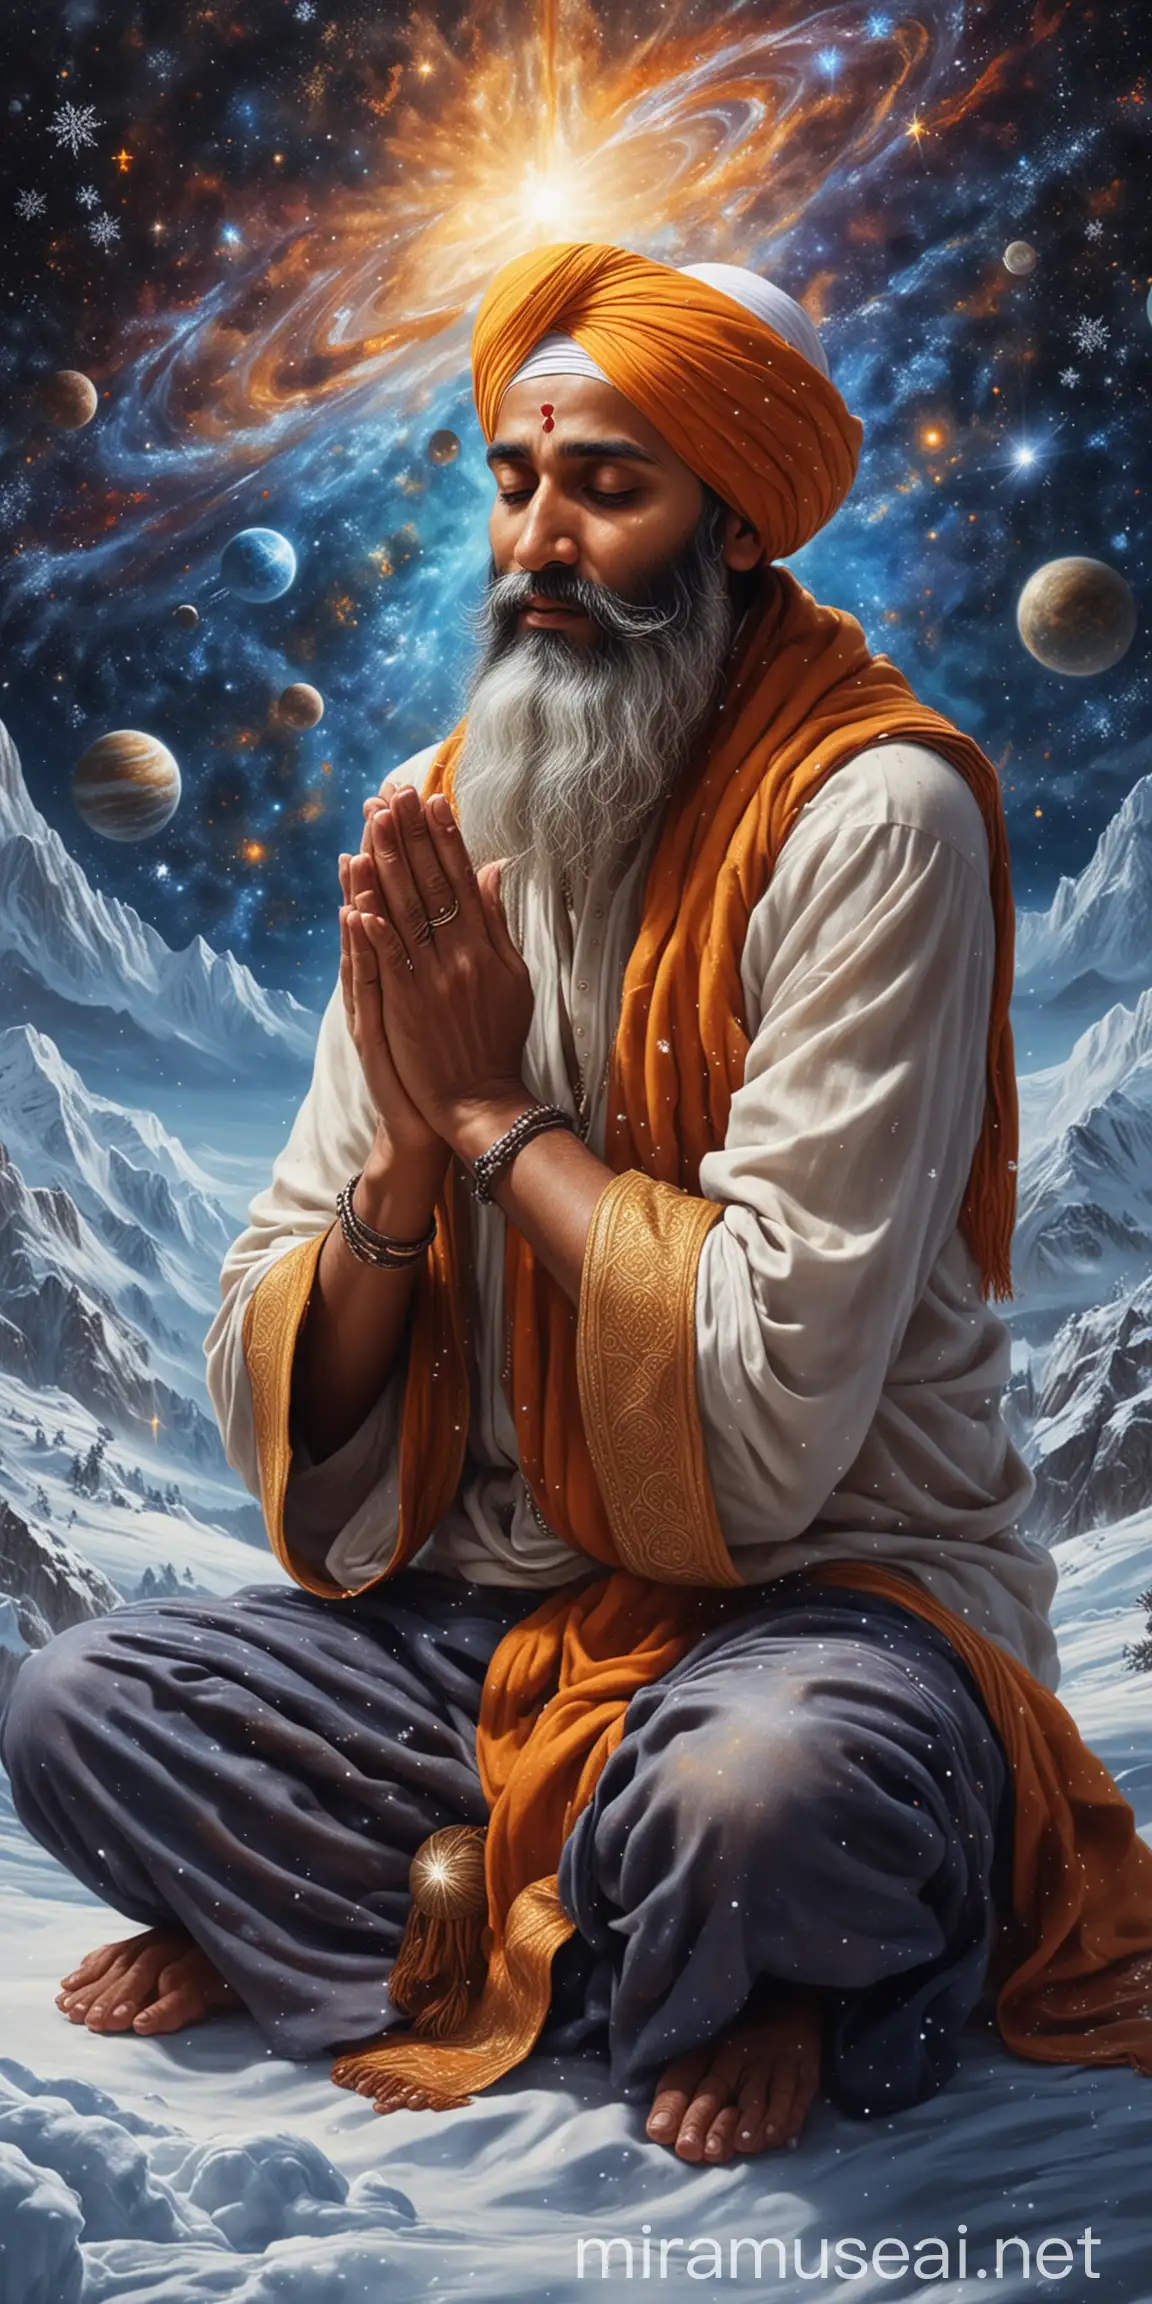 Sikh Man Praying in the Universe with Divine Lights